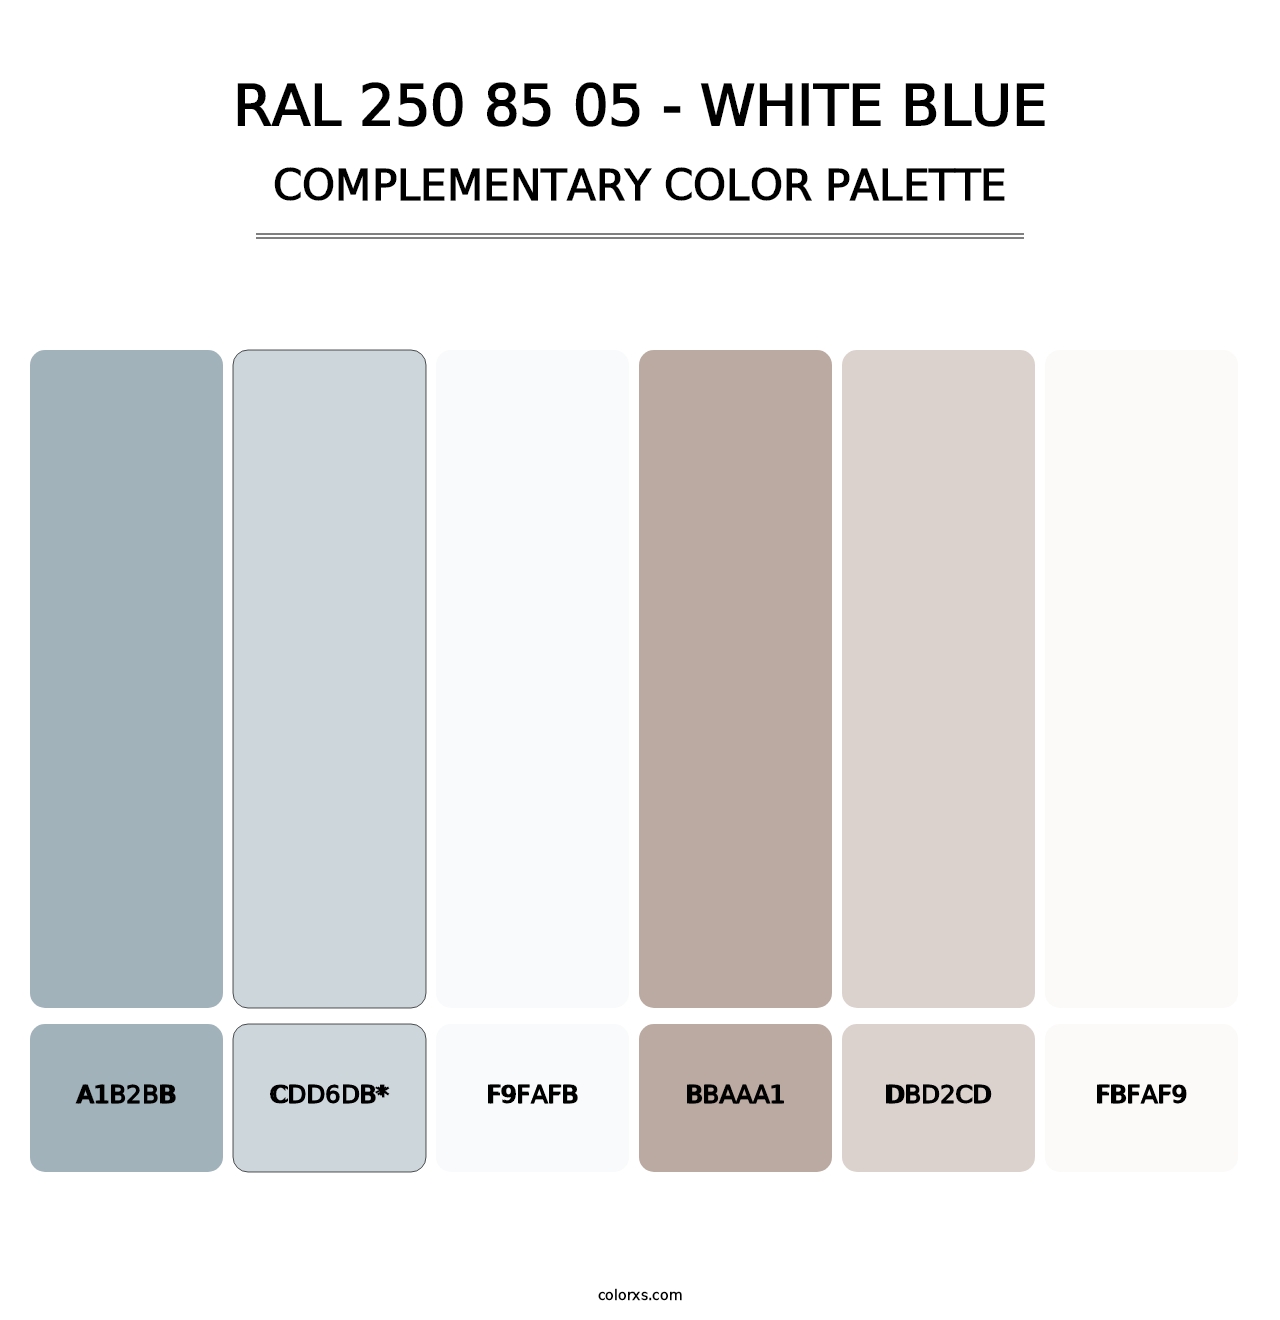 RAL 250 85 05 - White Blue - Complementary Color Palette